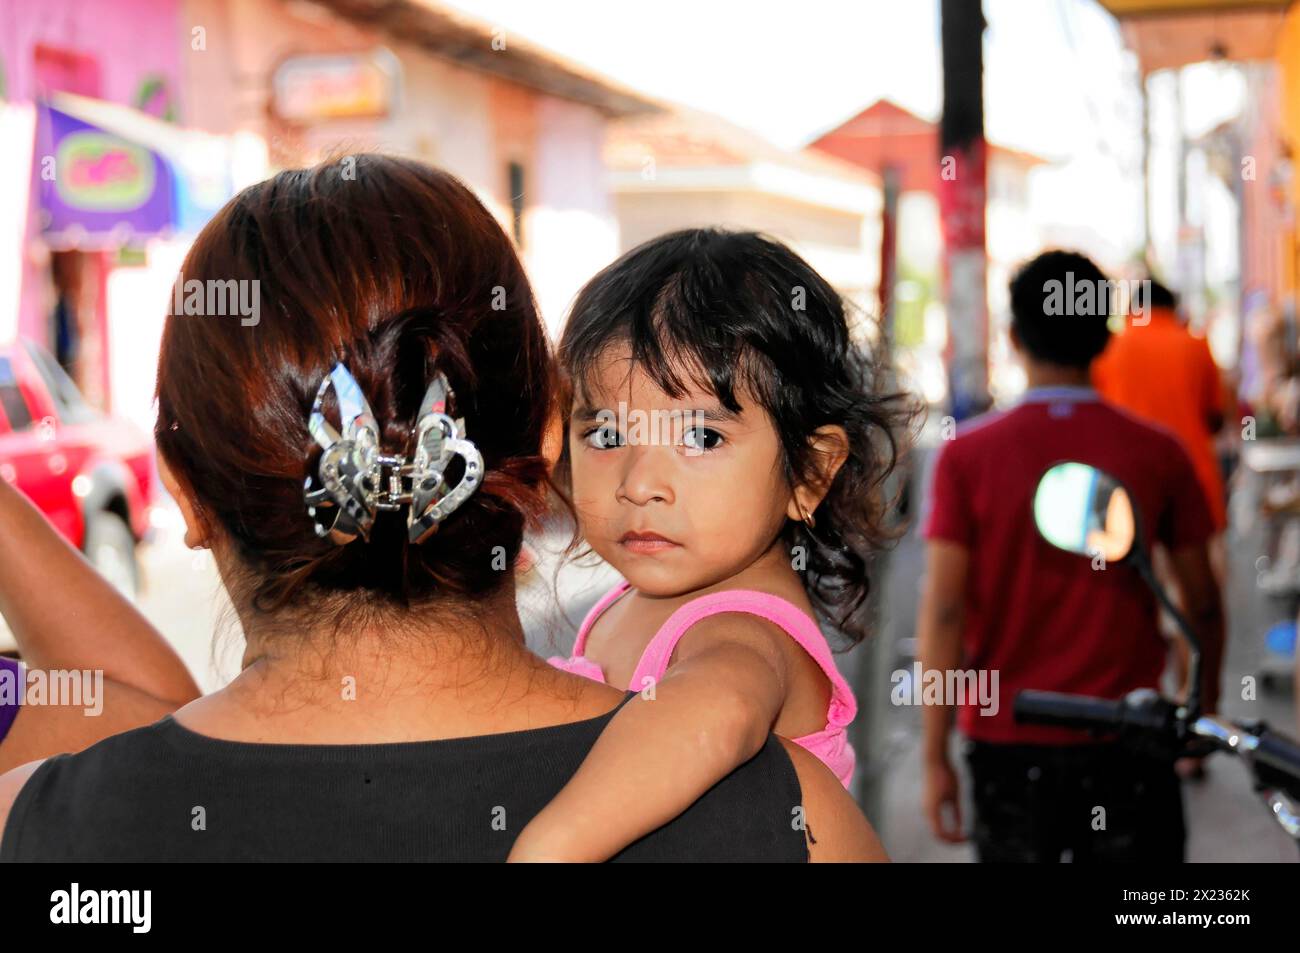 Leon, Nicaragua, A child looks over the shoulder of a woman in a busy city street, Central America, Central America Stock Photo